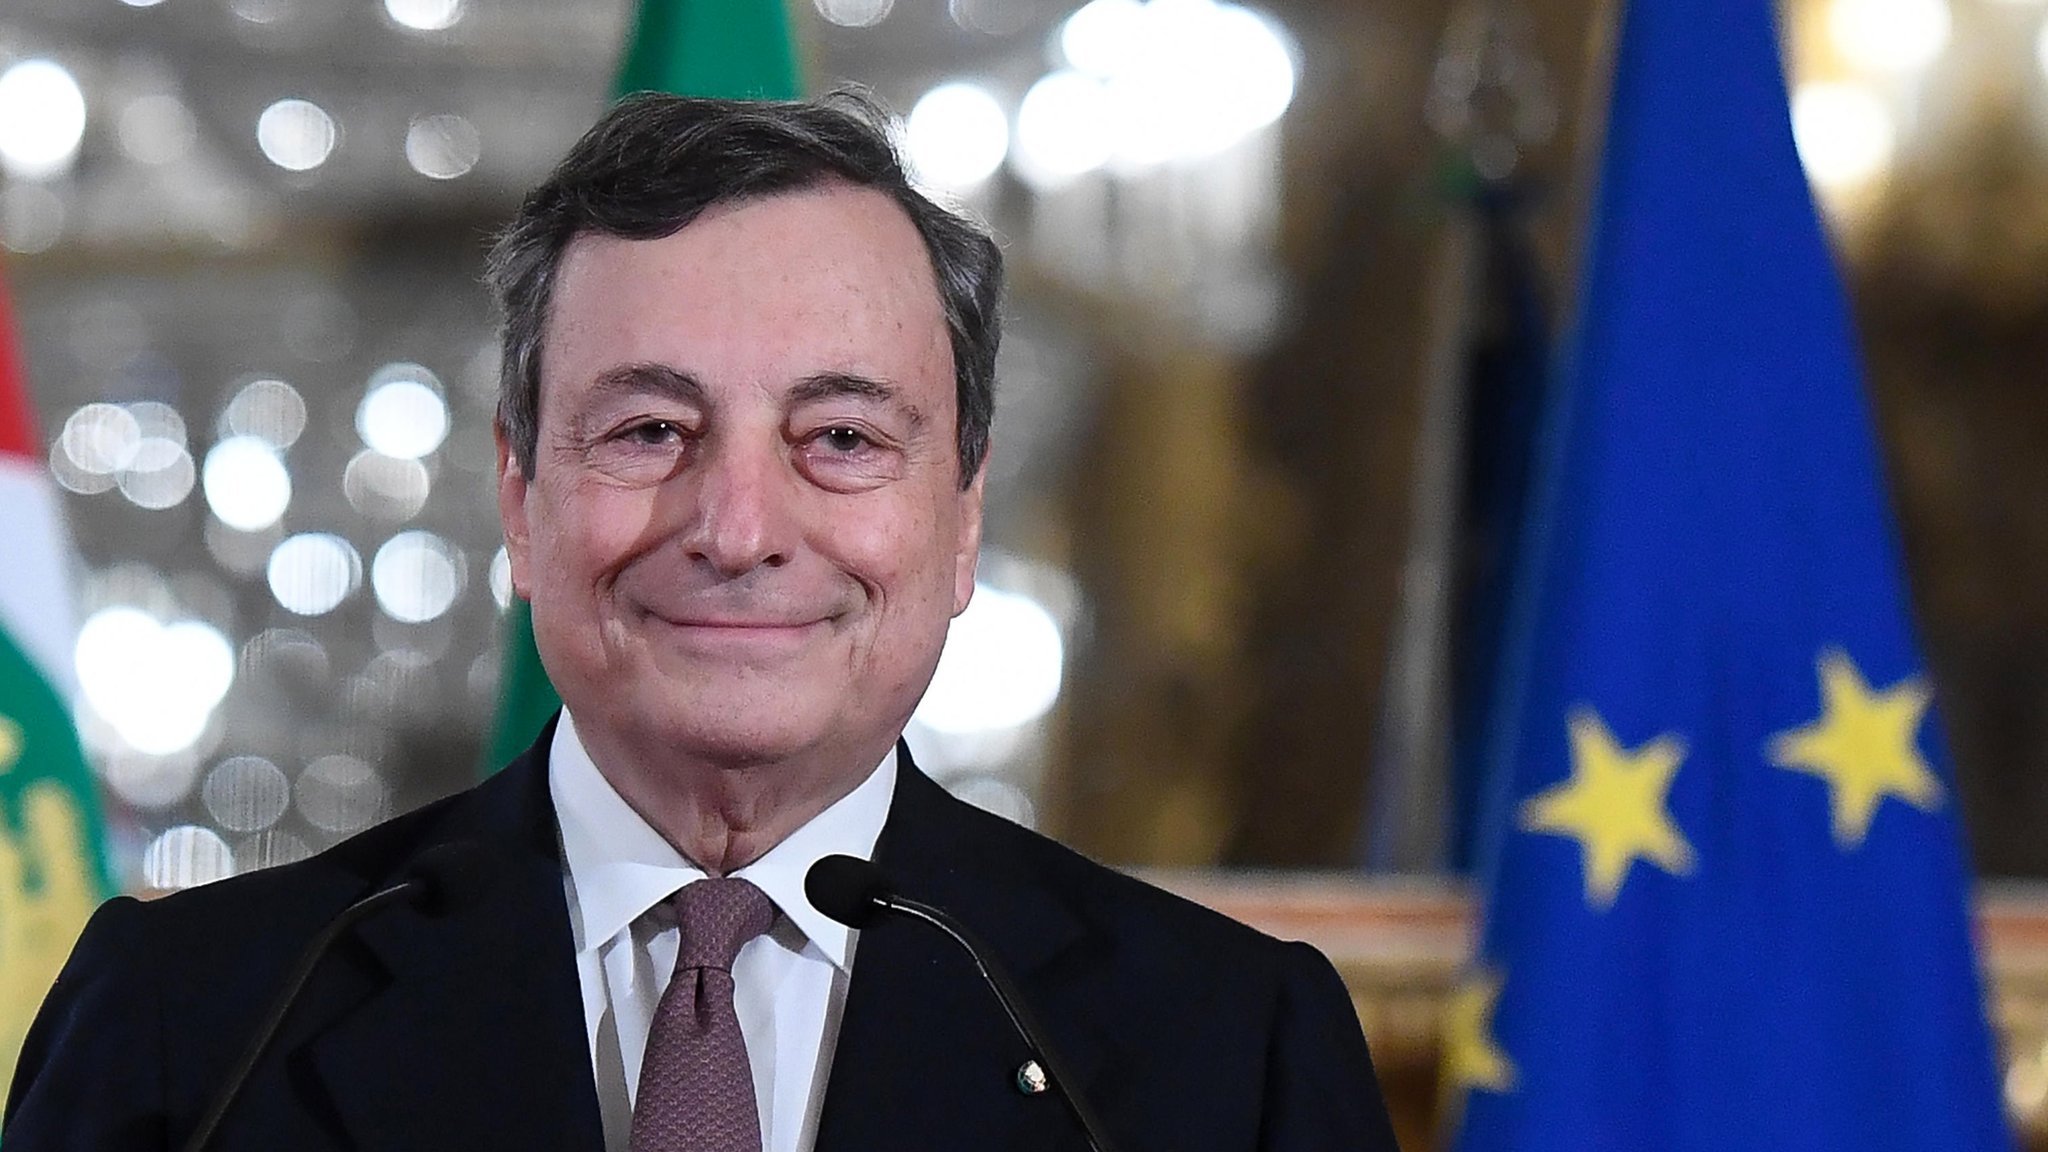 Mario Draghi sworn in as Italy's new prime minister